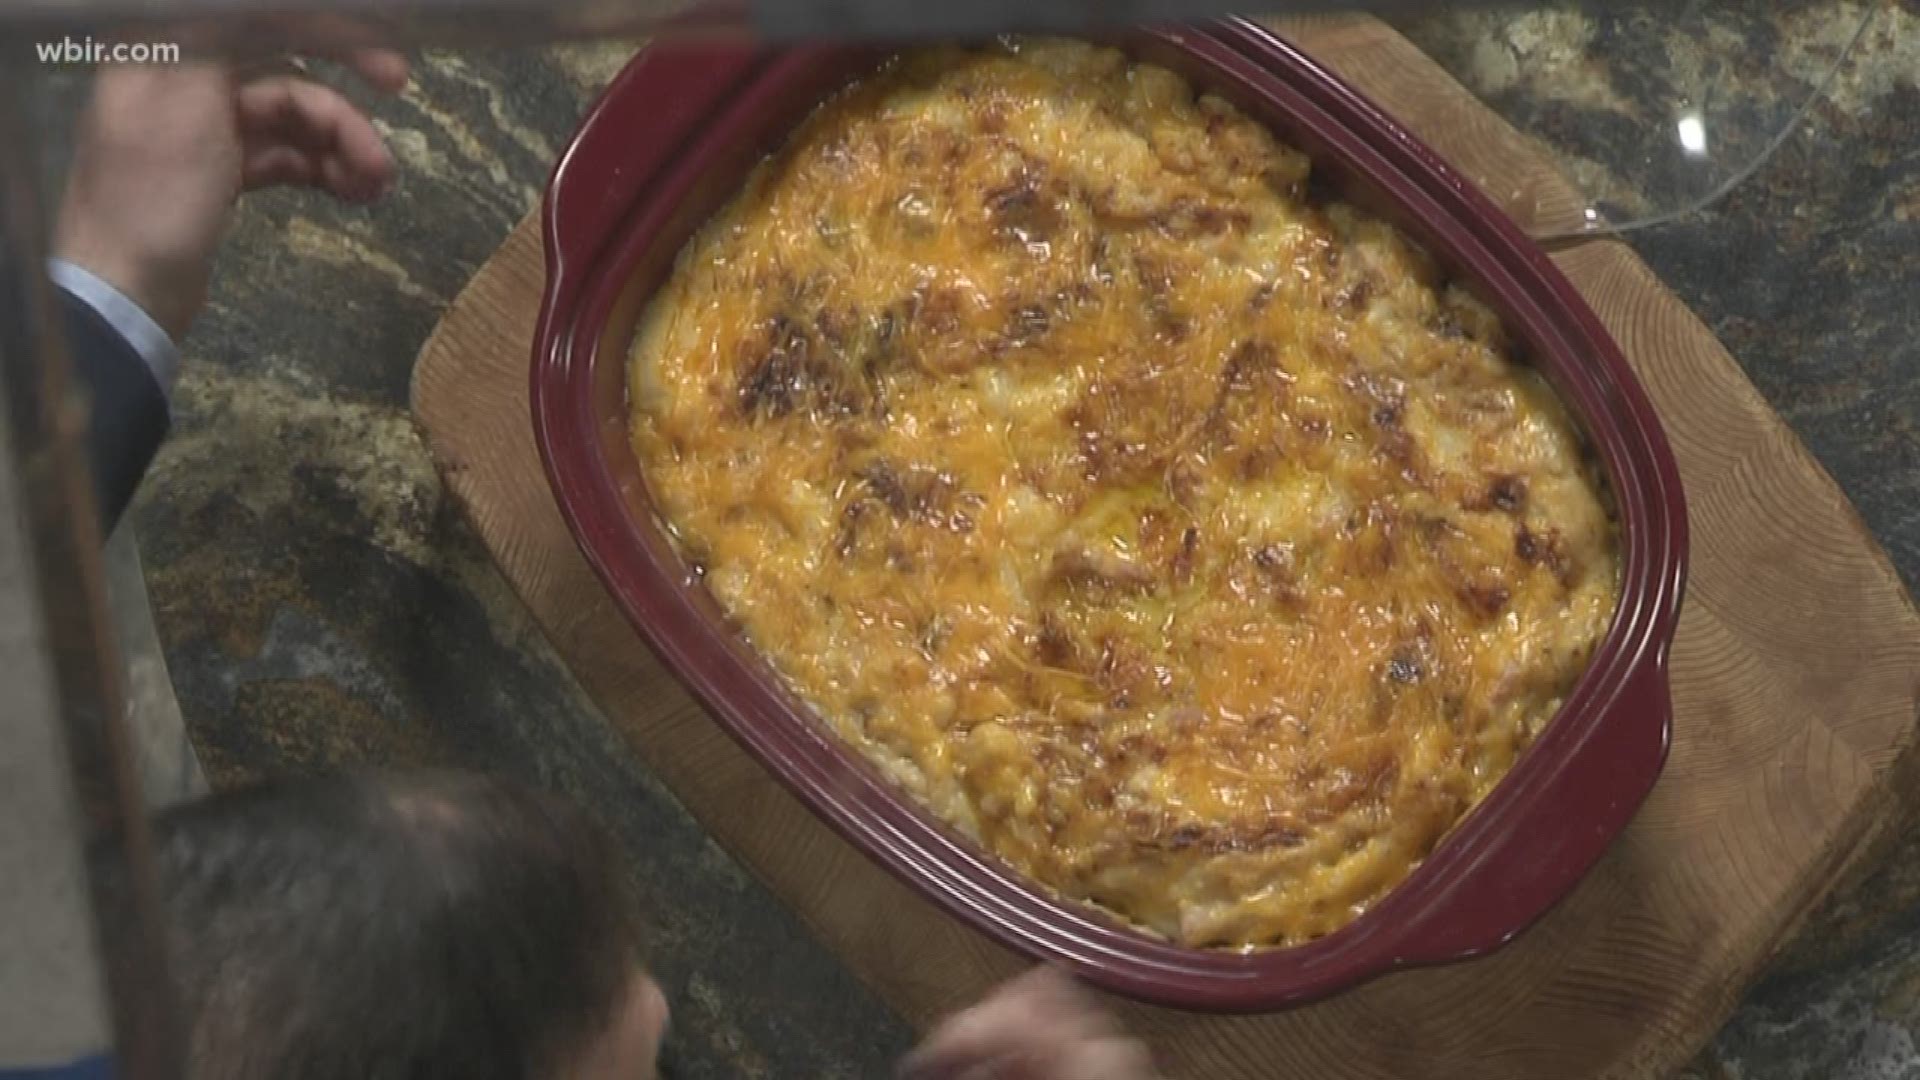 Melissa Graves from Donna's Old Town Cafe joins us in the kitchen to make ham and potato casserole.